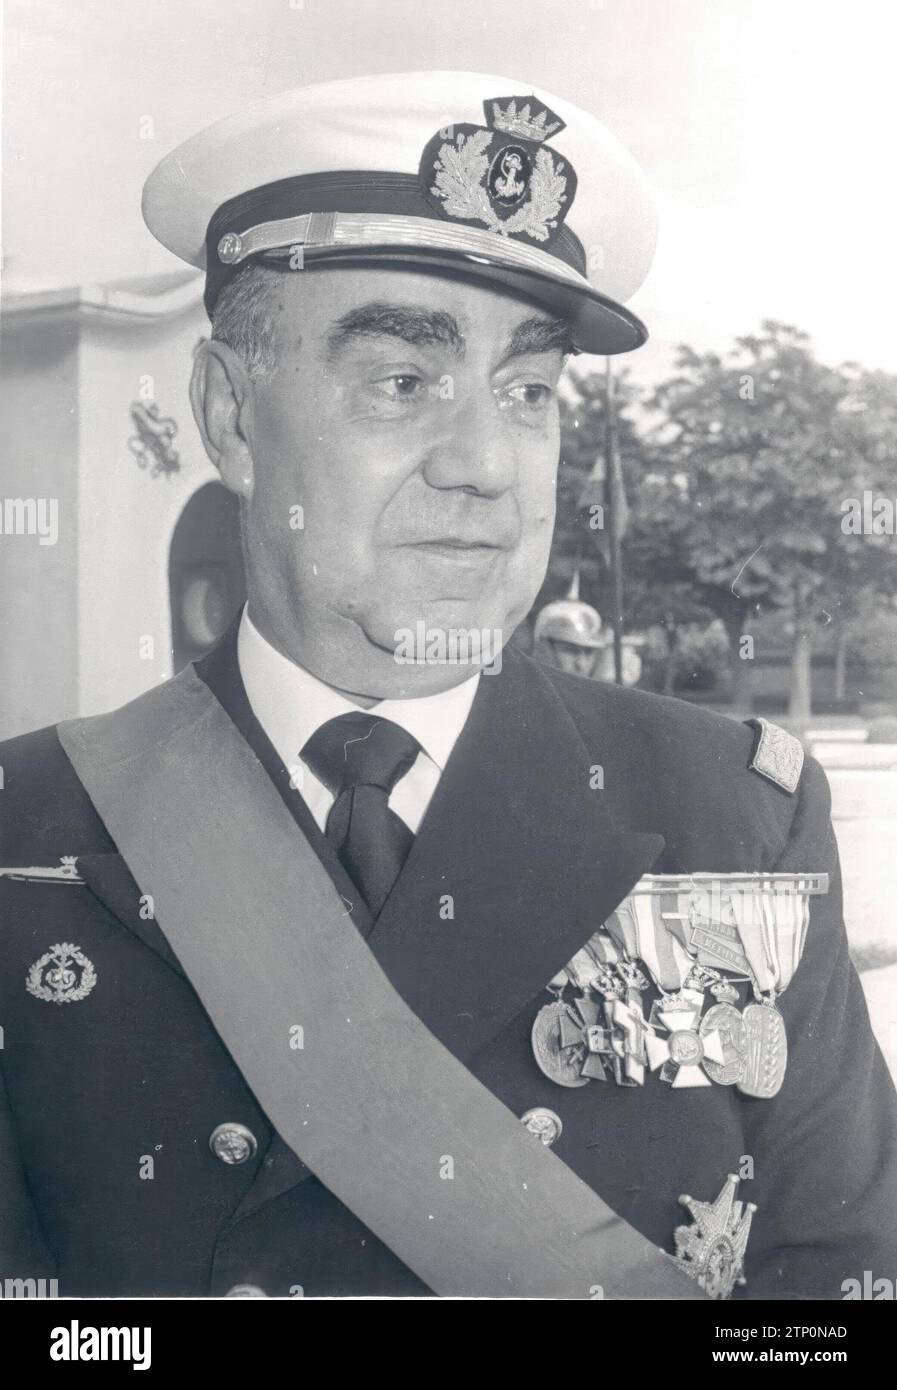 06/13/1973. Admiral Luis Carrero Blanco, during his time as President of the Government. Credit: Album / Archivo ABC / Manuel Sanz Bermejo Stock Photo